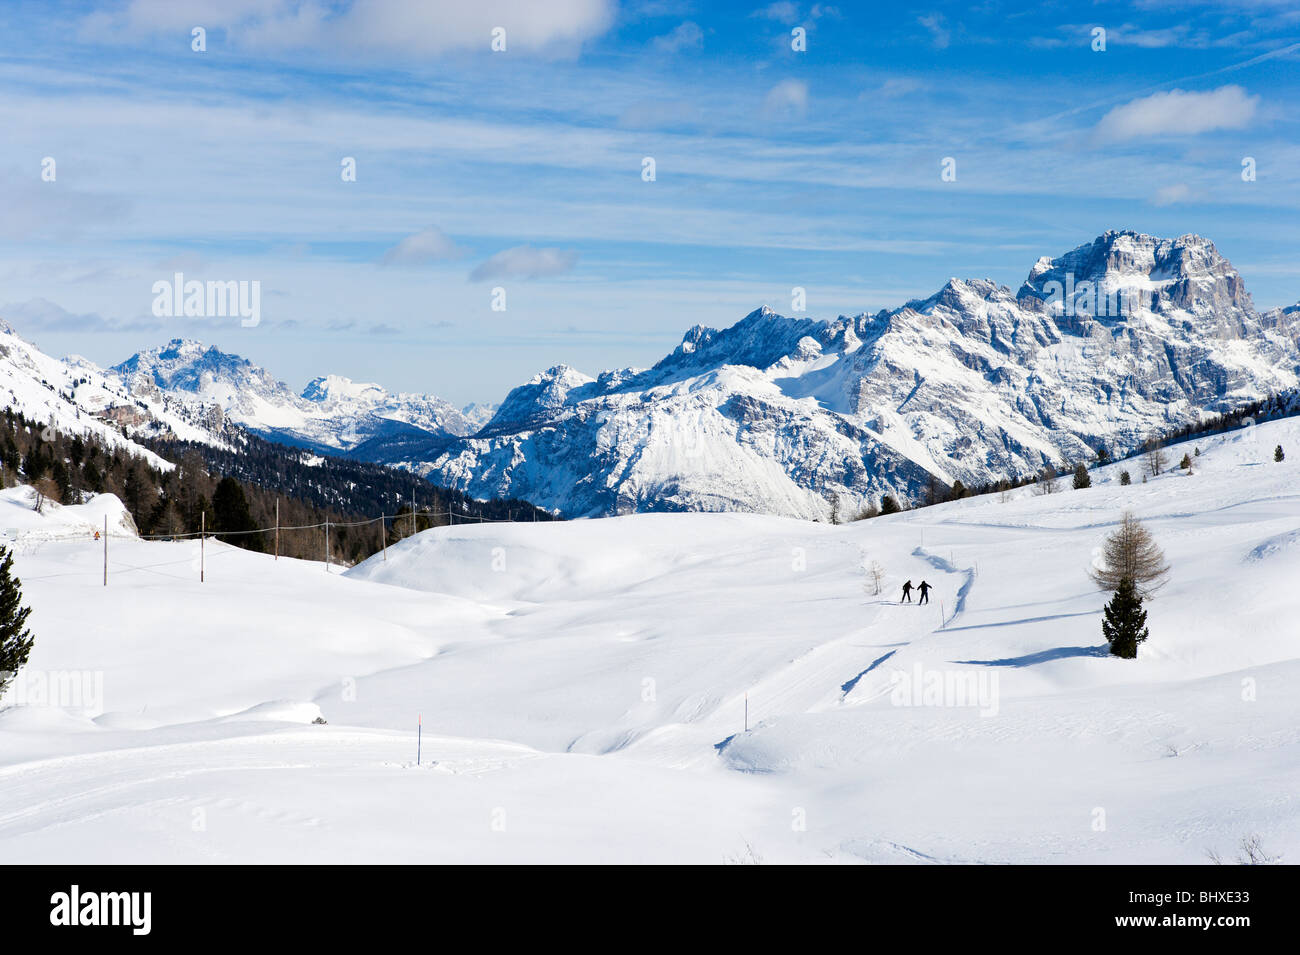 Cross-country skiers on the slopes at the Passo di Falzarego between Andraz and Cortina d'Ampezzo, Dolomites, Italy Stock Photo